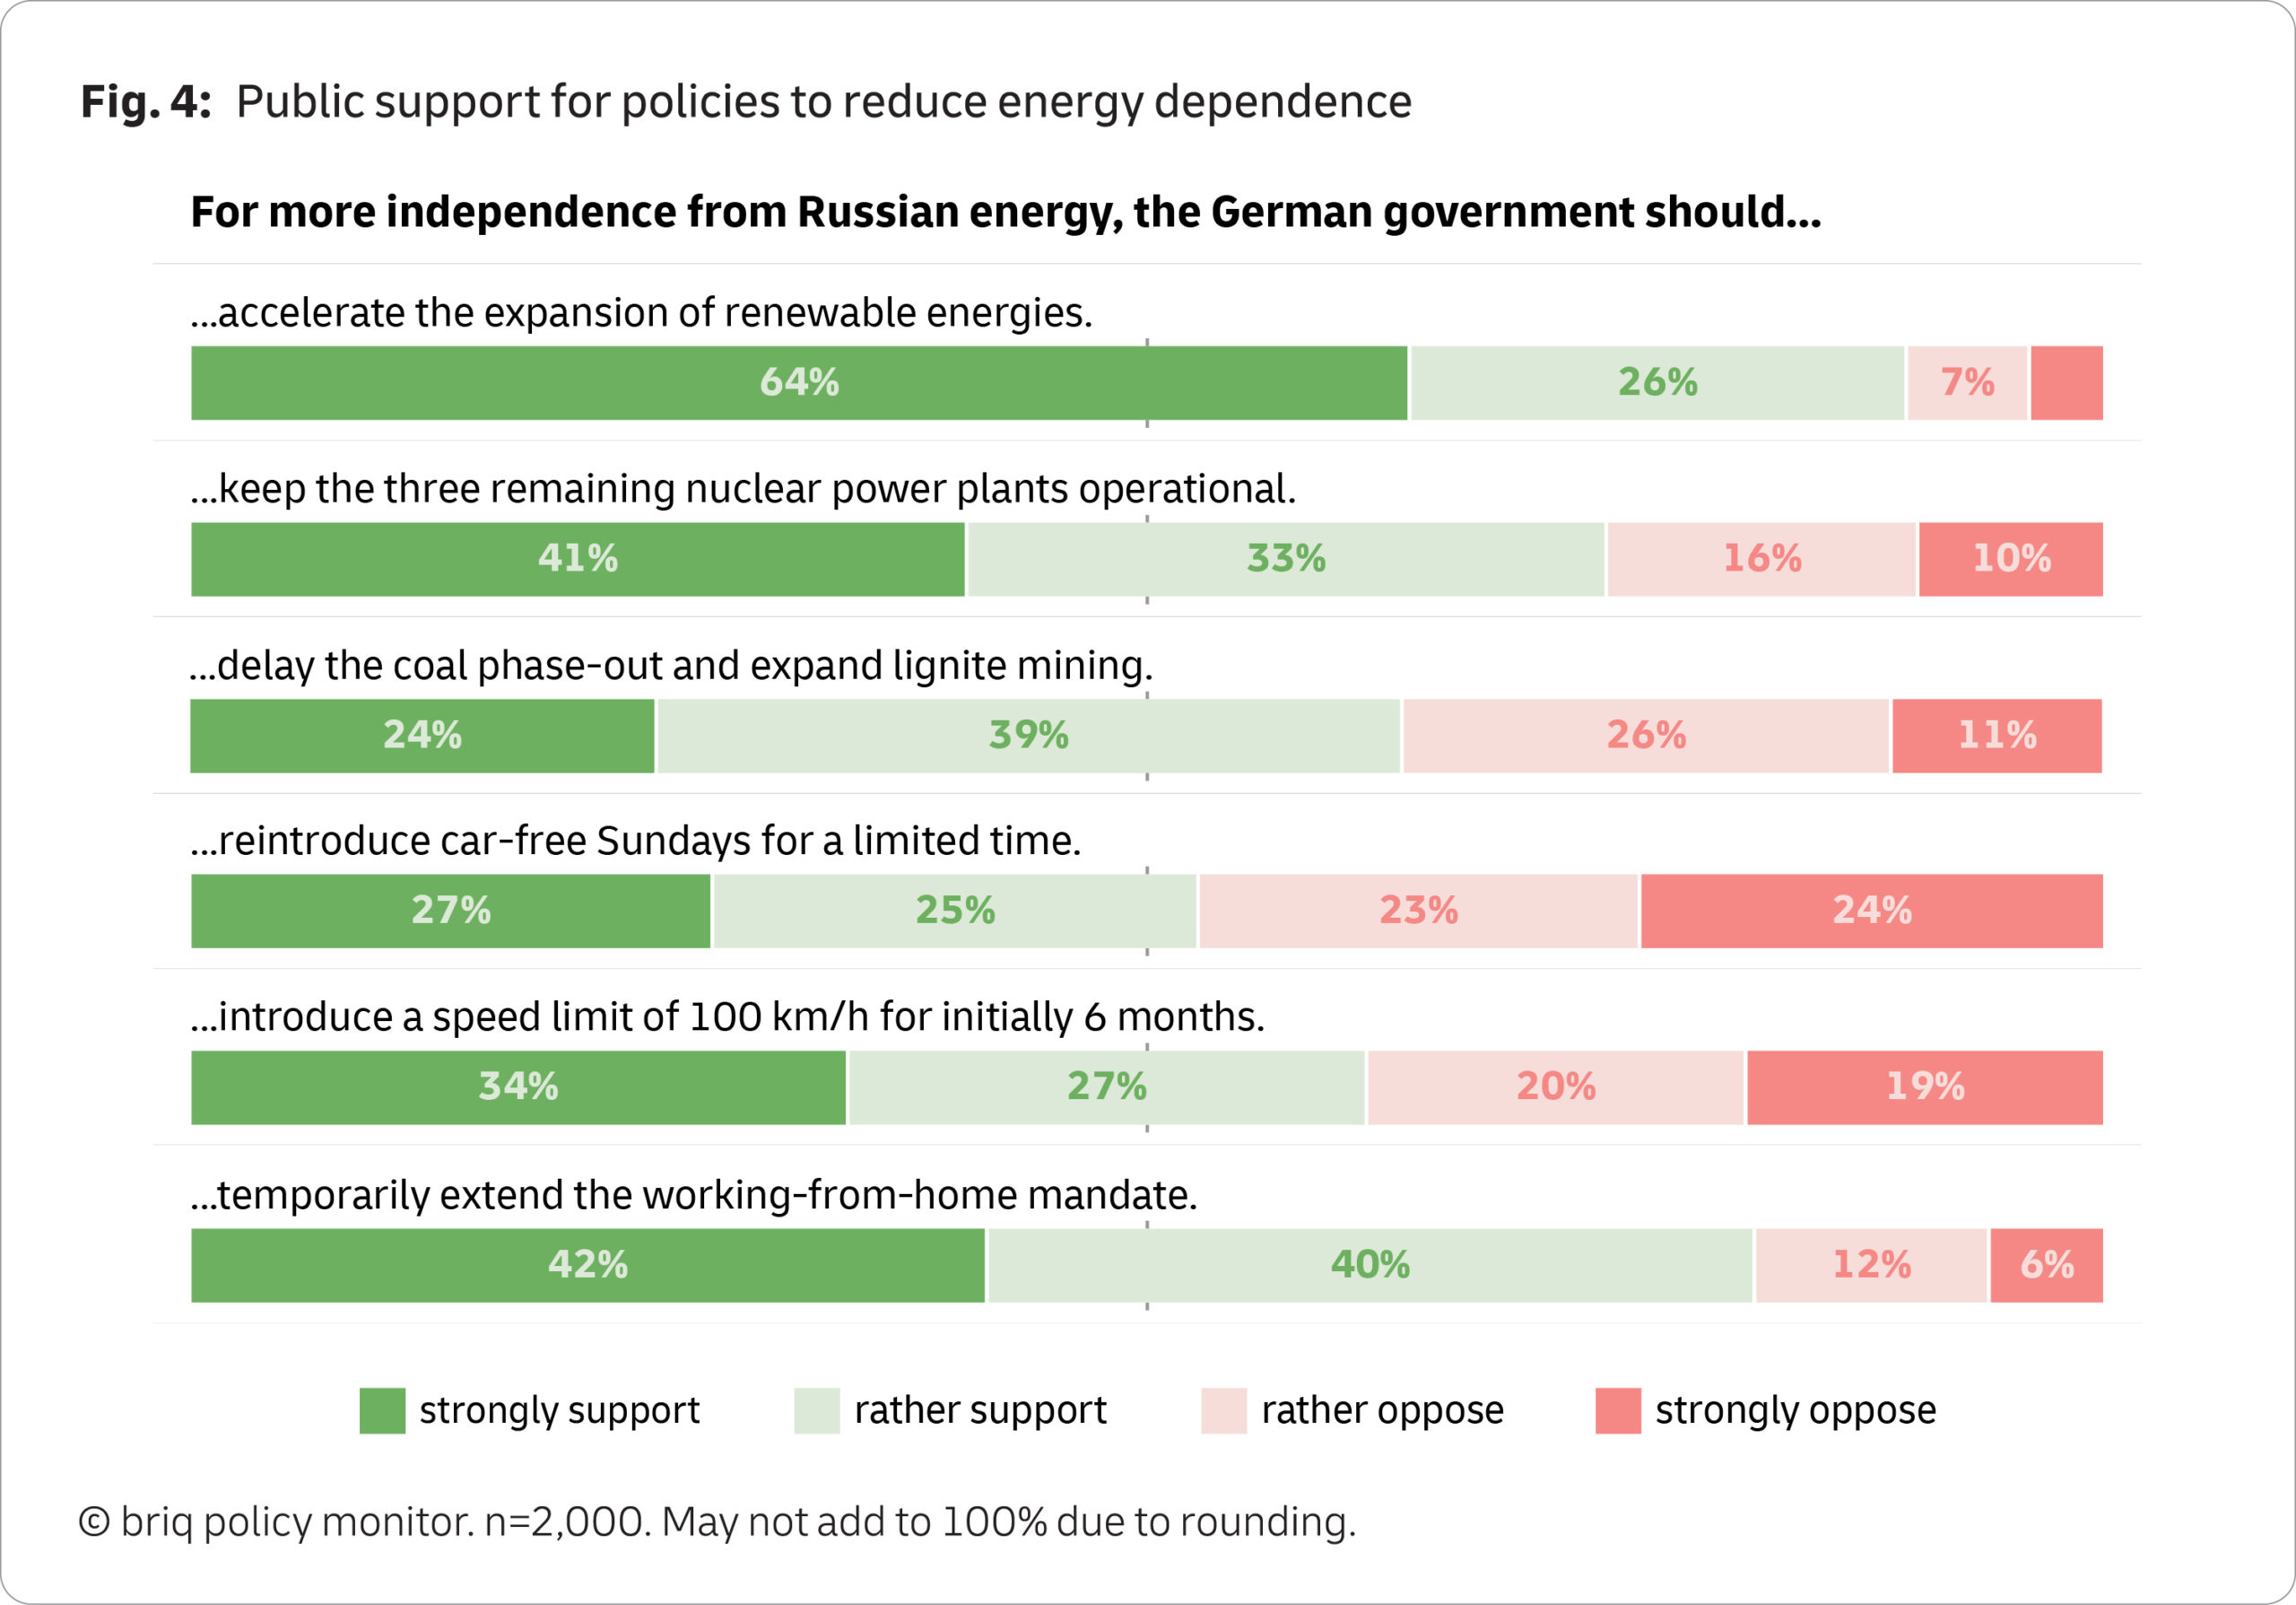 Fig. 4 Public support for policies to reduce energy dependence